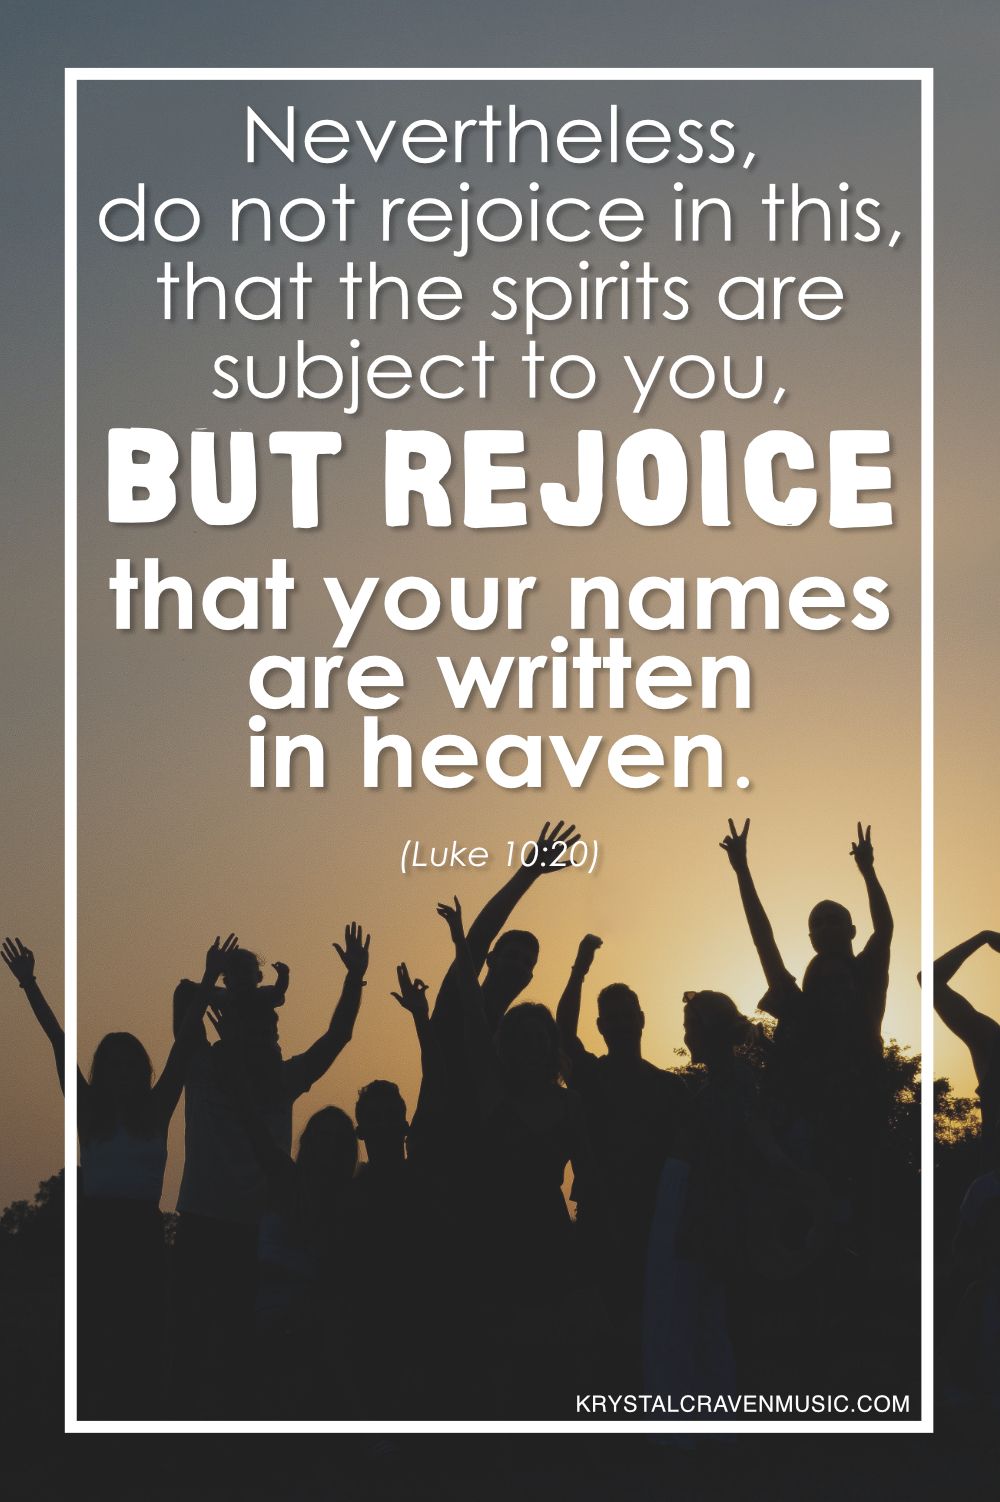 The text from Luke 10:20 "Nevertheless, do not rejoice in this, that the spirits are subject to you, but rejoice that your names are written in heaven" in a large white font above the silhouette of a number of people with their arms raised up.